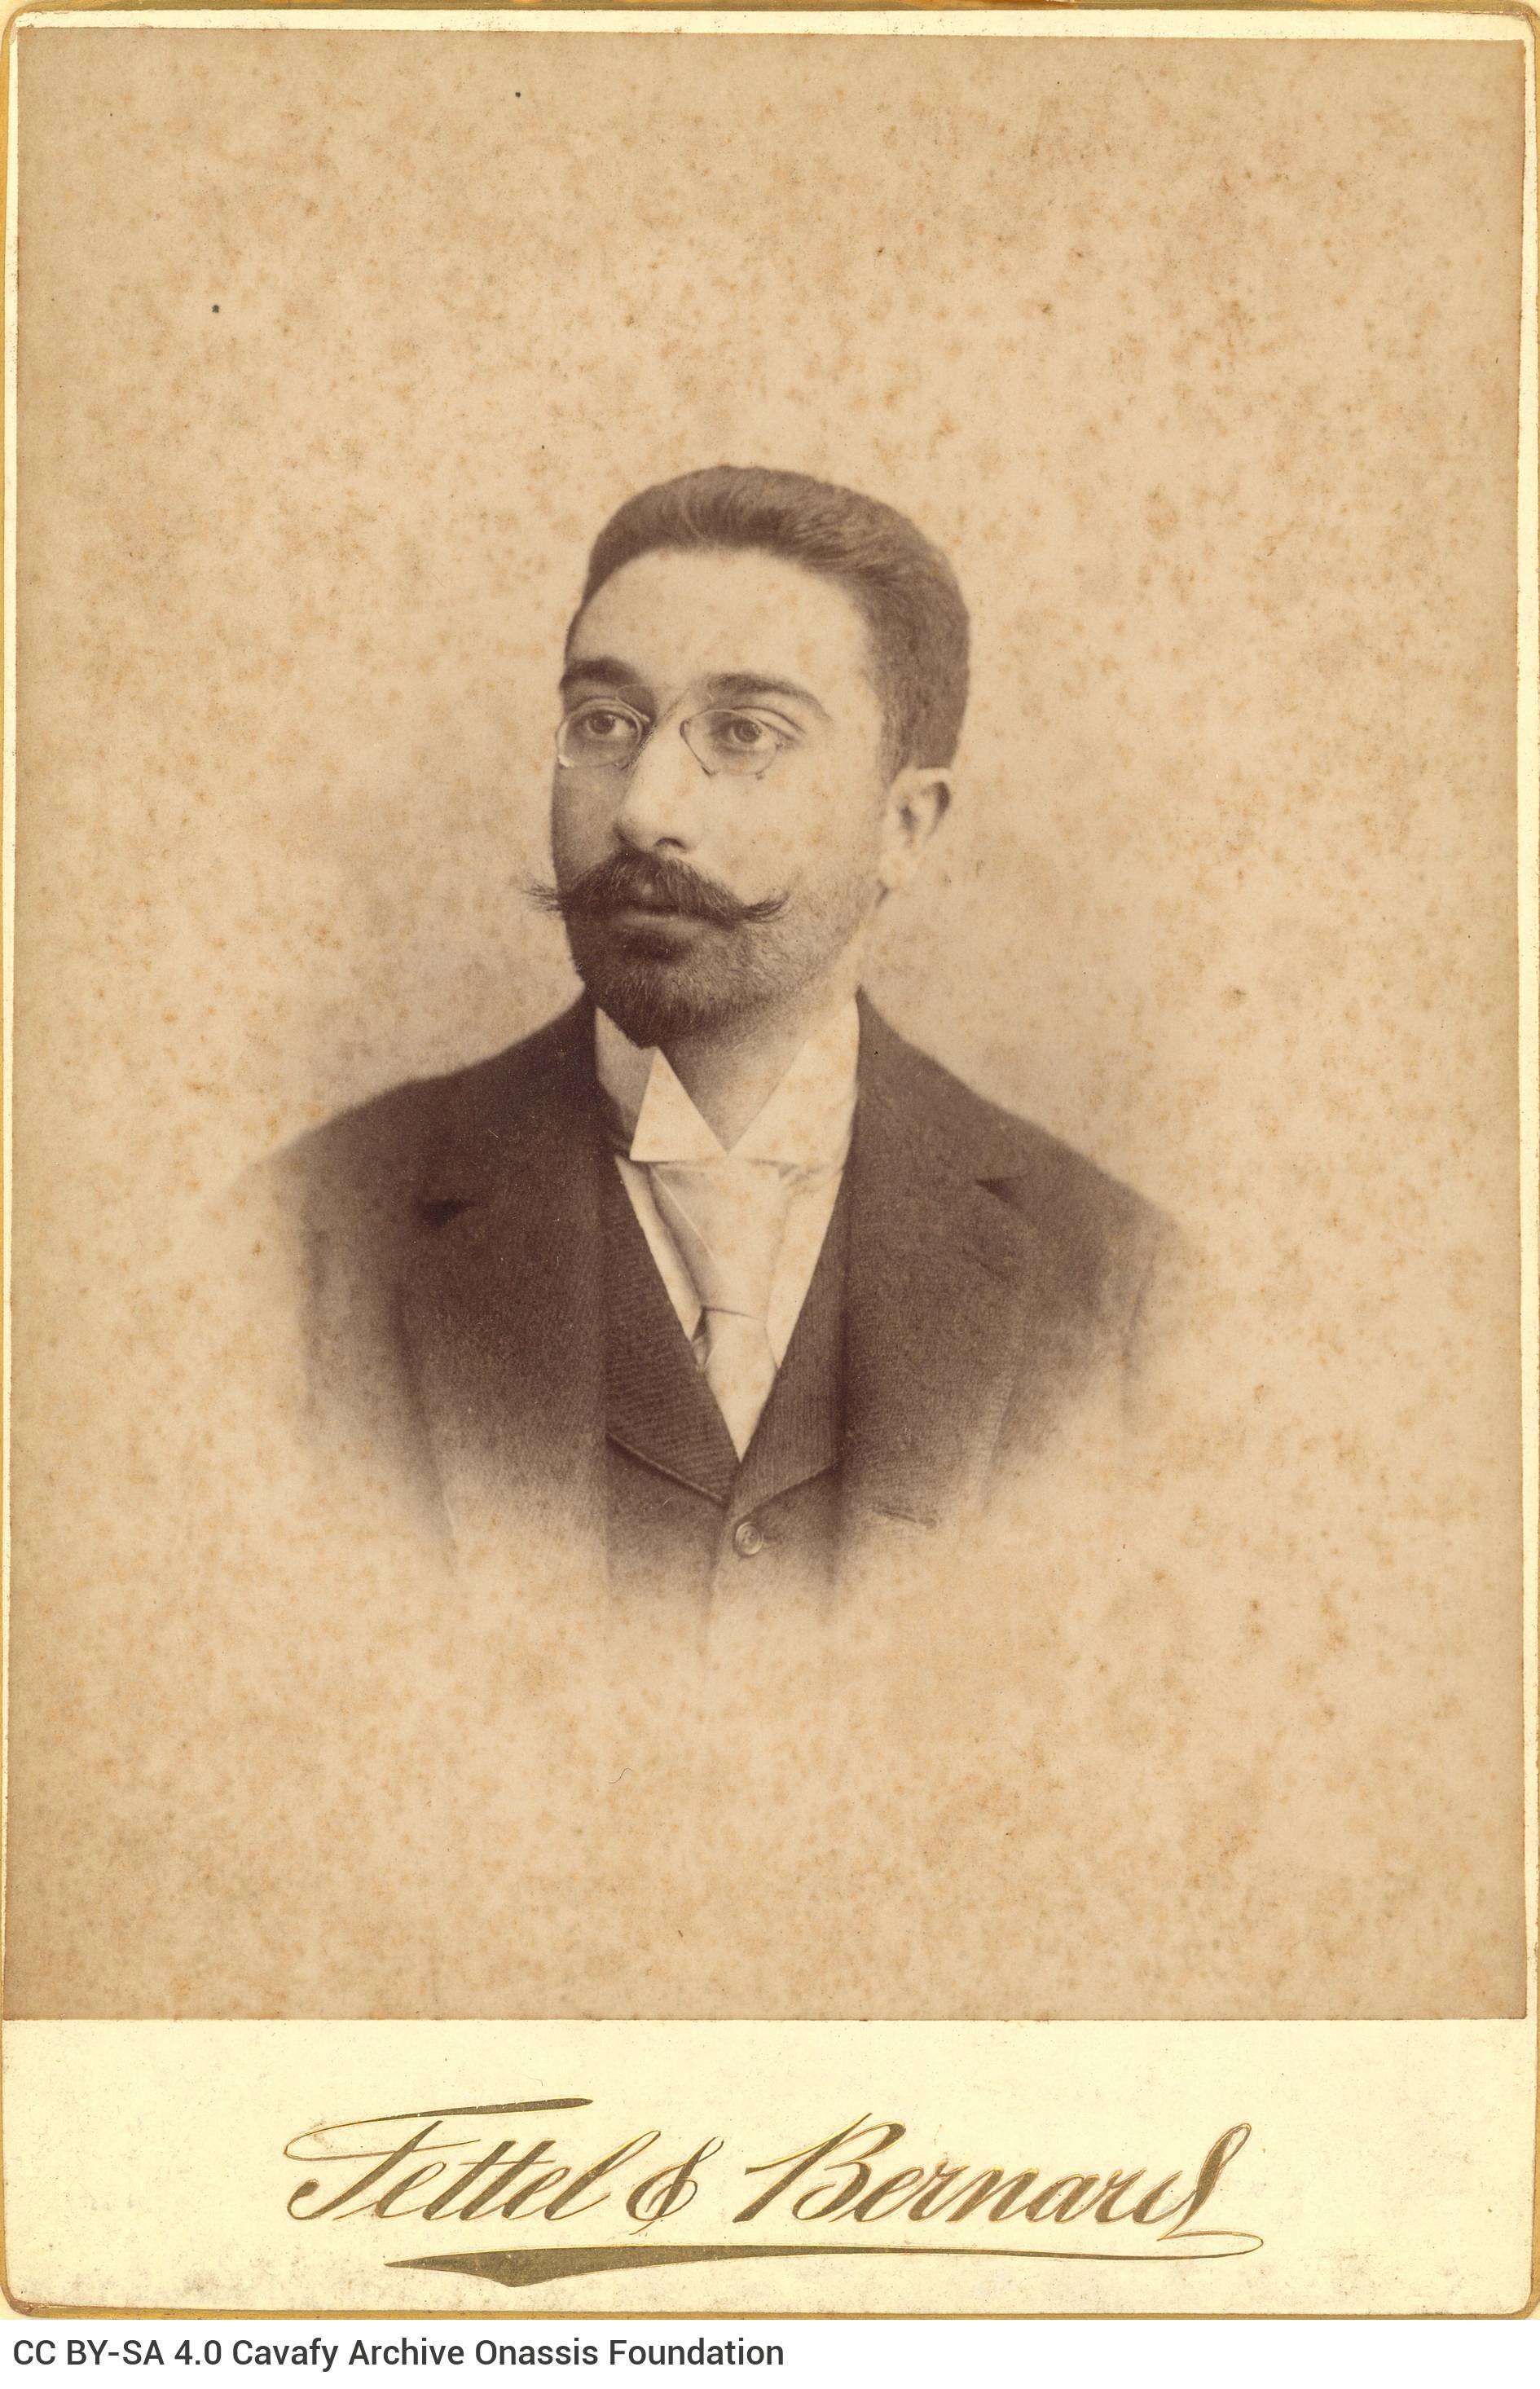 Undated photographic portrait of Cavafy by the photo shop of Fettel & Bernard in Alexandria, in three copies. The poet has sh